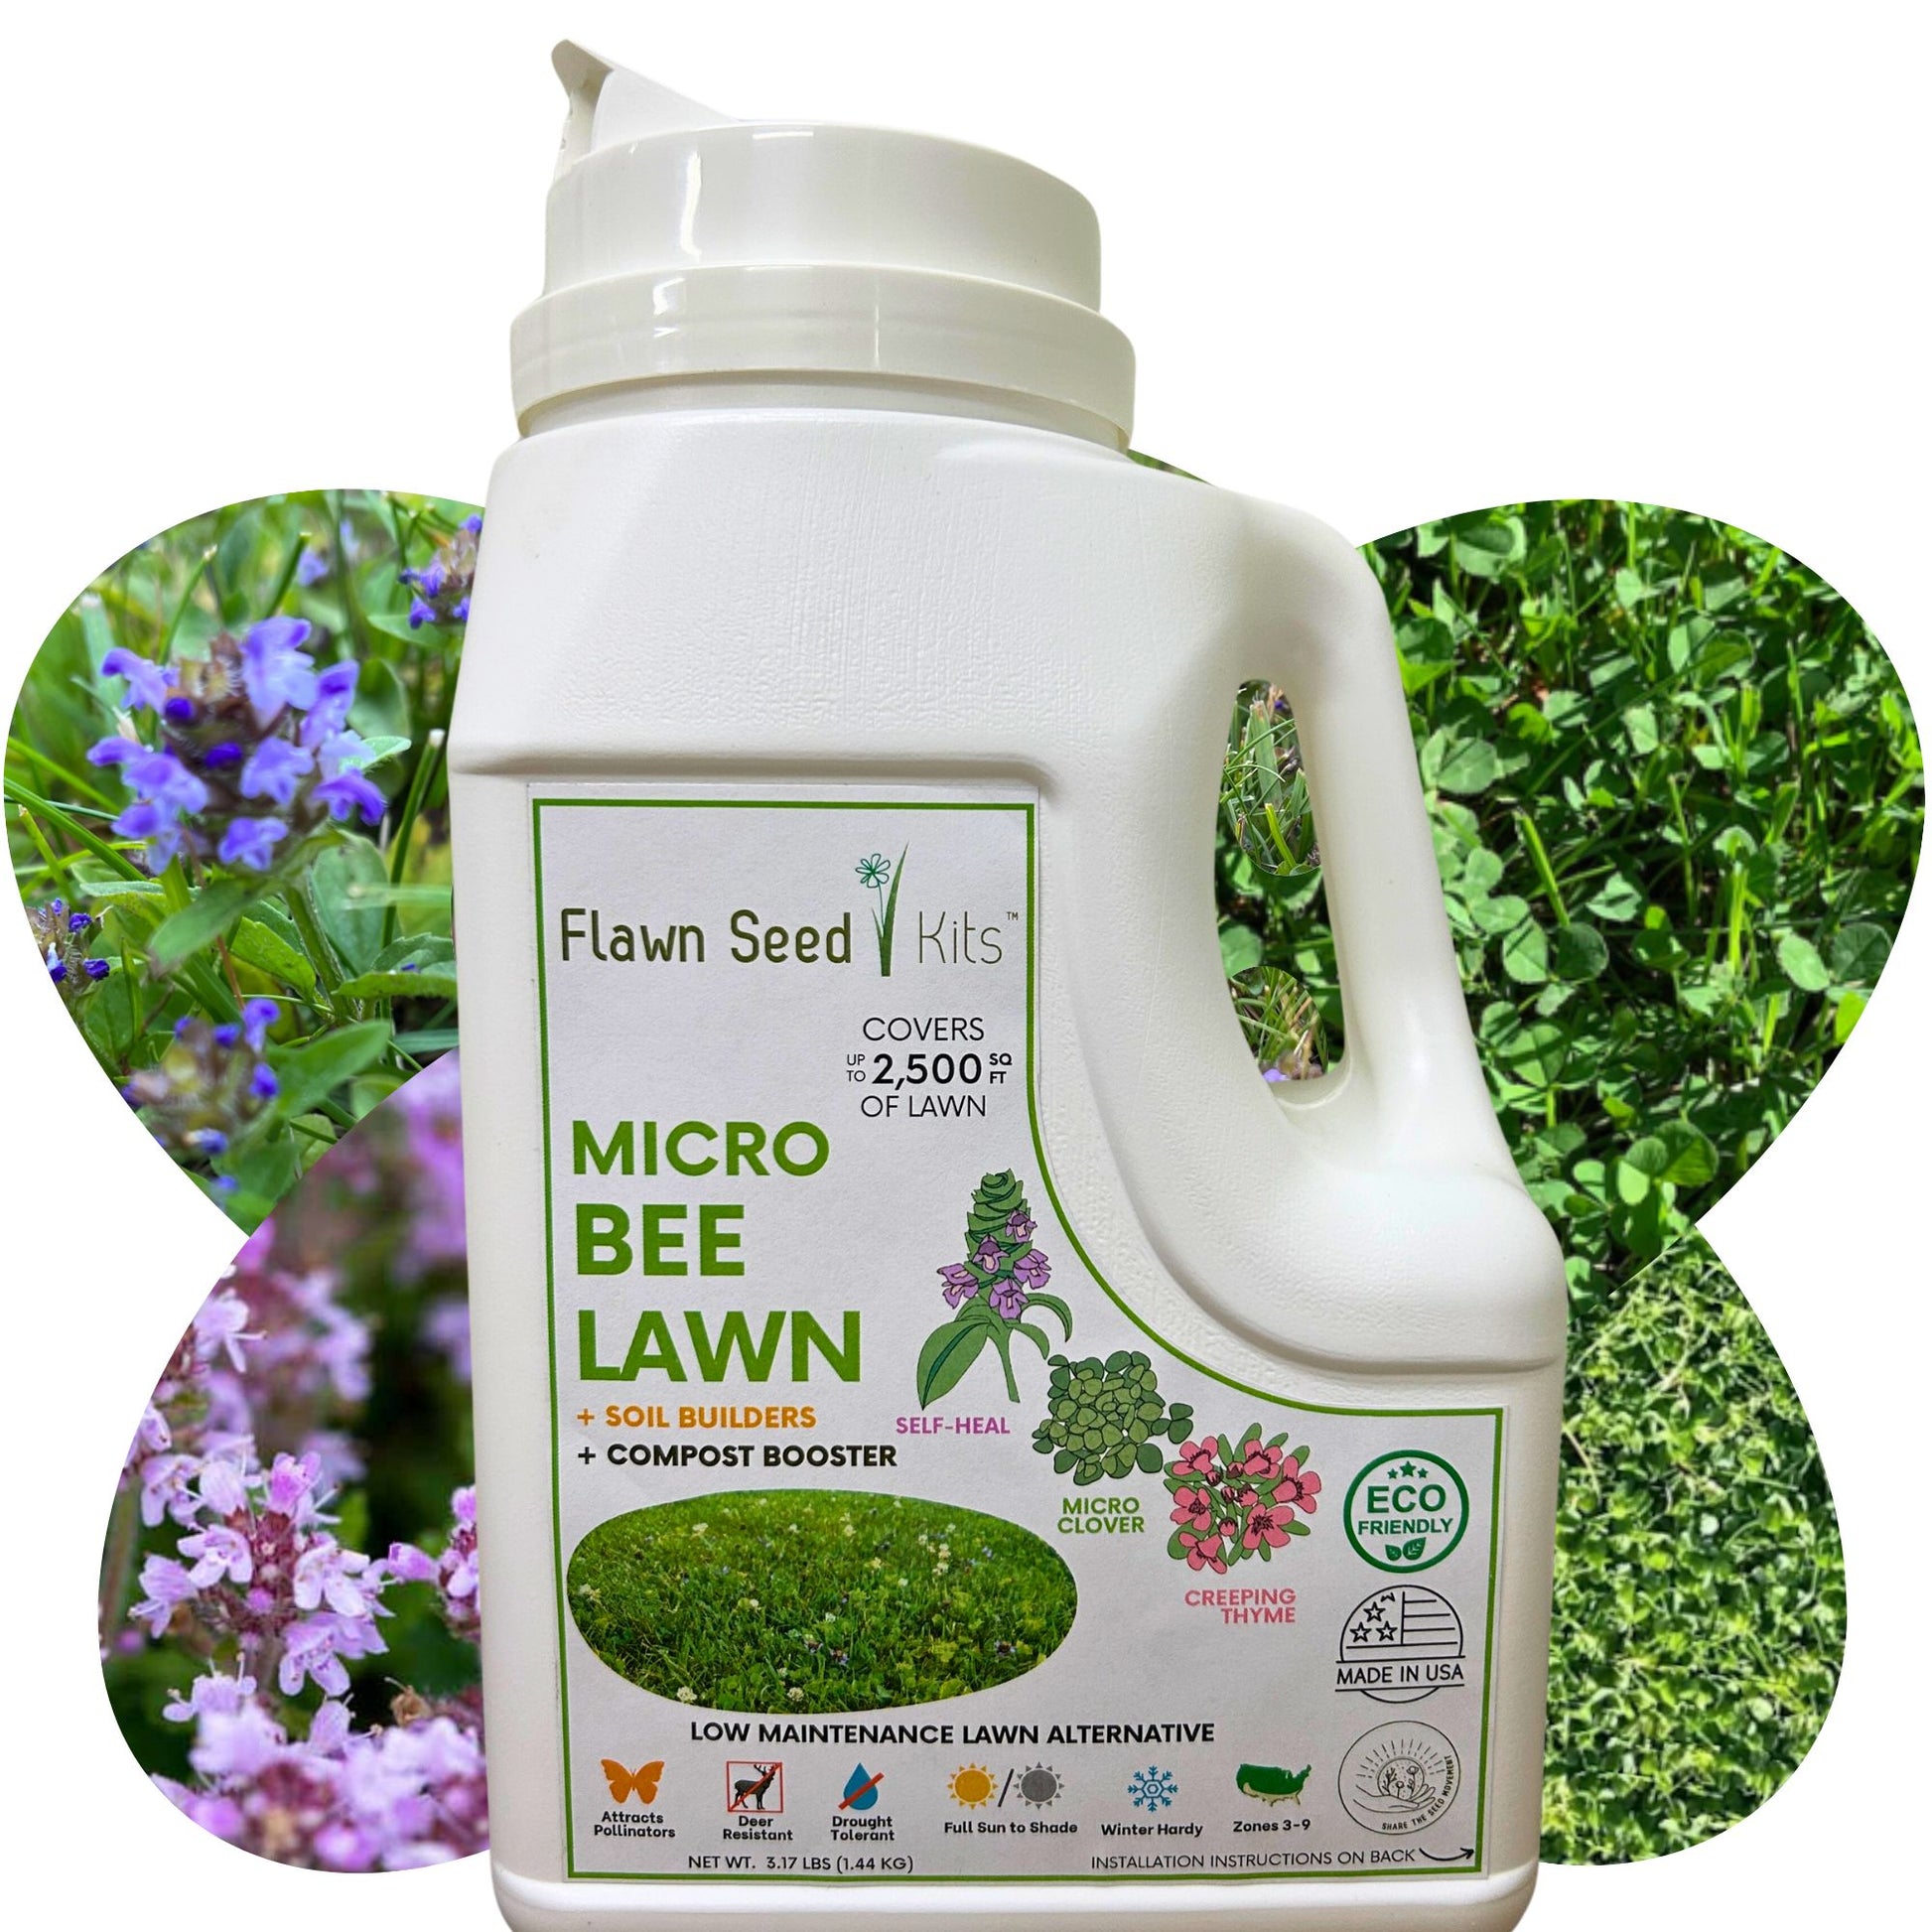 Micro Bee Lawn Flowering Pollinator Seed Kit, Micro Clover Blooms, Self-Heal Blooms, Creeping Thyme Blooms, Easy Spread Container